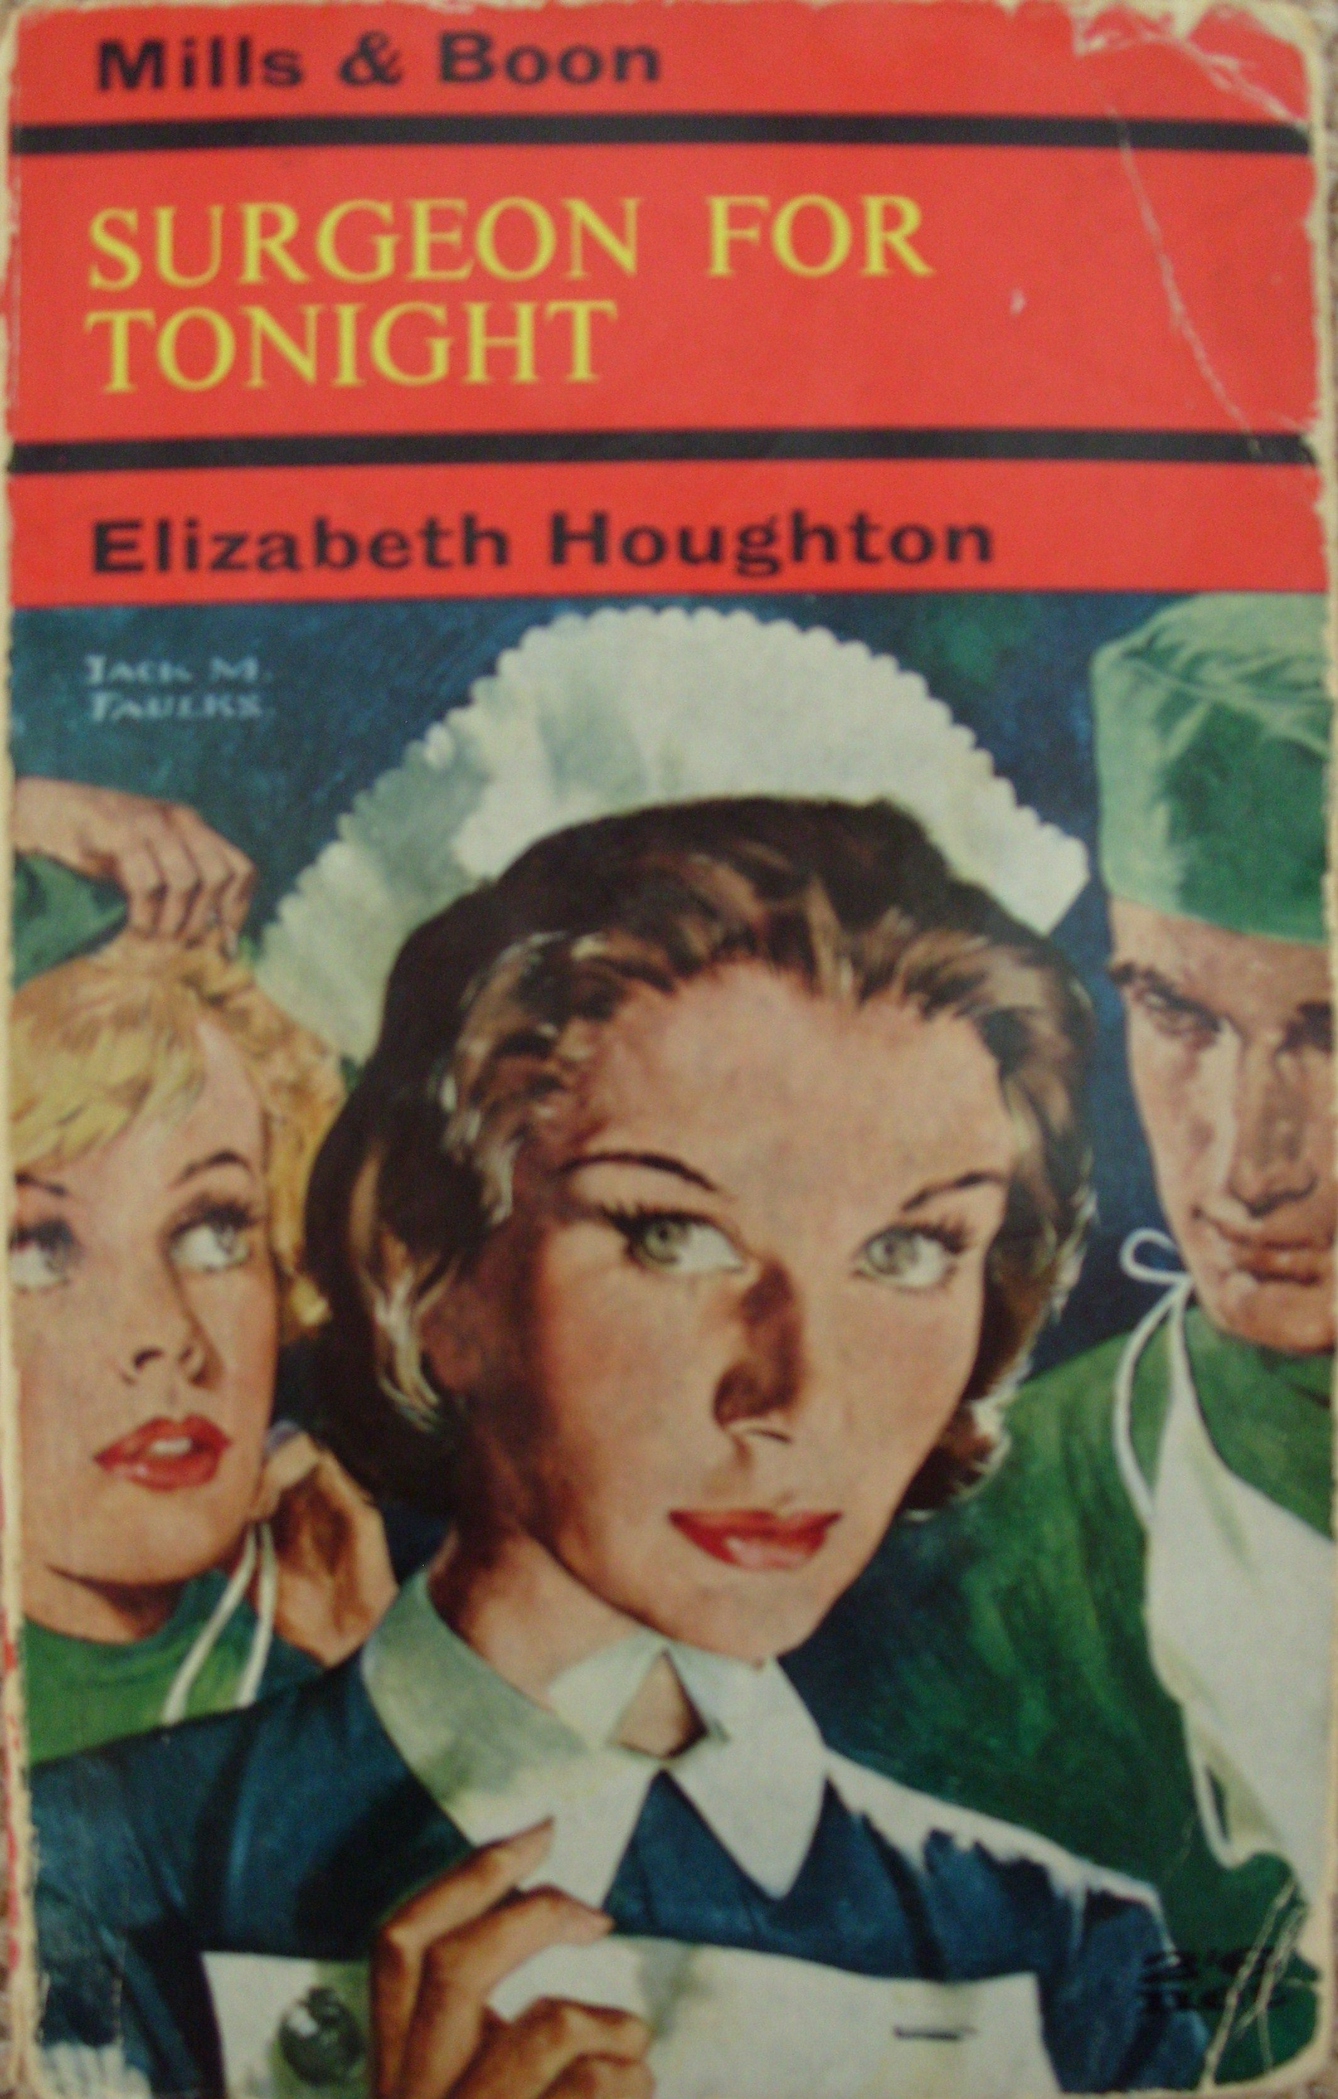 Cover of a Mills & Boon novel: Surgeon for Tonight by Elizabeth Houghton, with a cover illustration of two female nurses and one male doctor